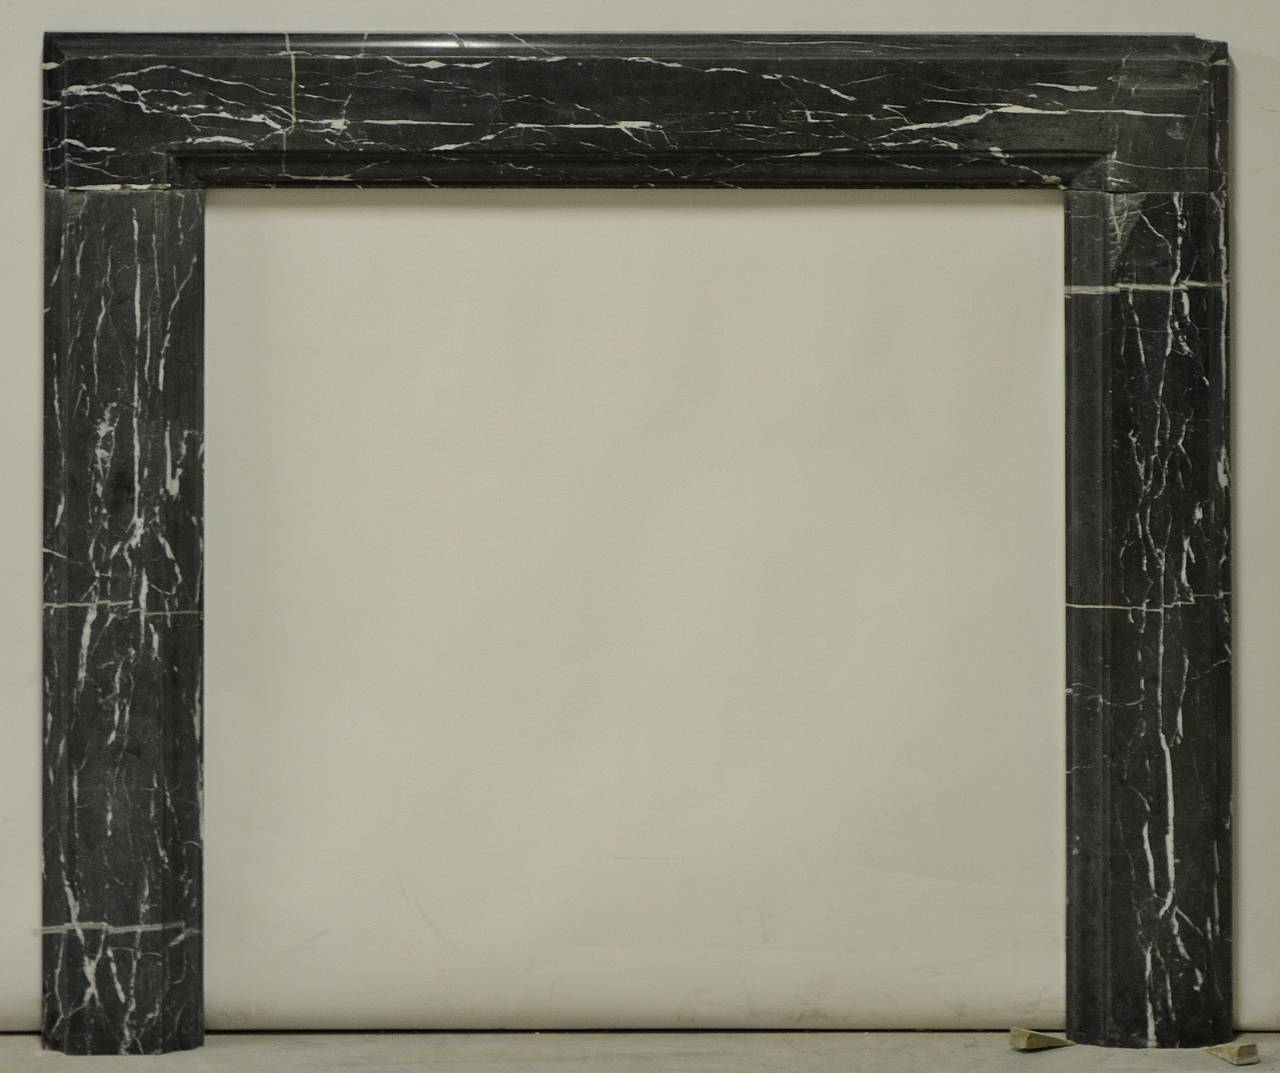 19th century, Bleu Belge marble bolection fireplace mantel. 

Opening measurements : 36.2 x 35 inch (height x width).

Has been restored, please see the additional pictures.